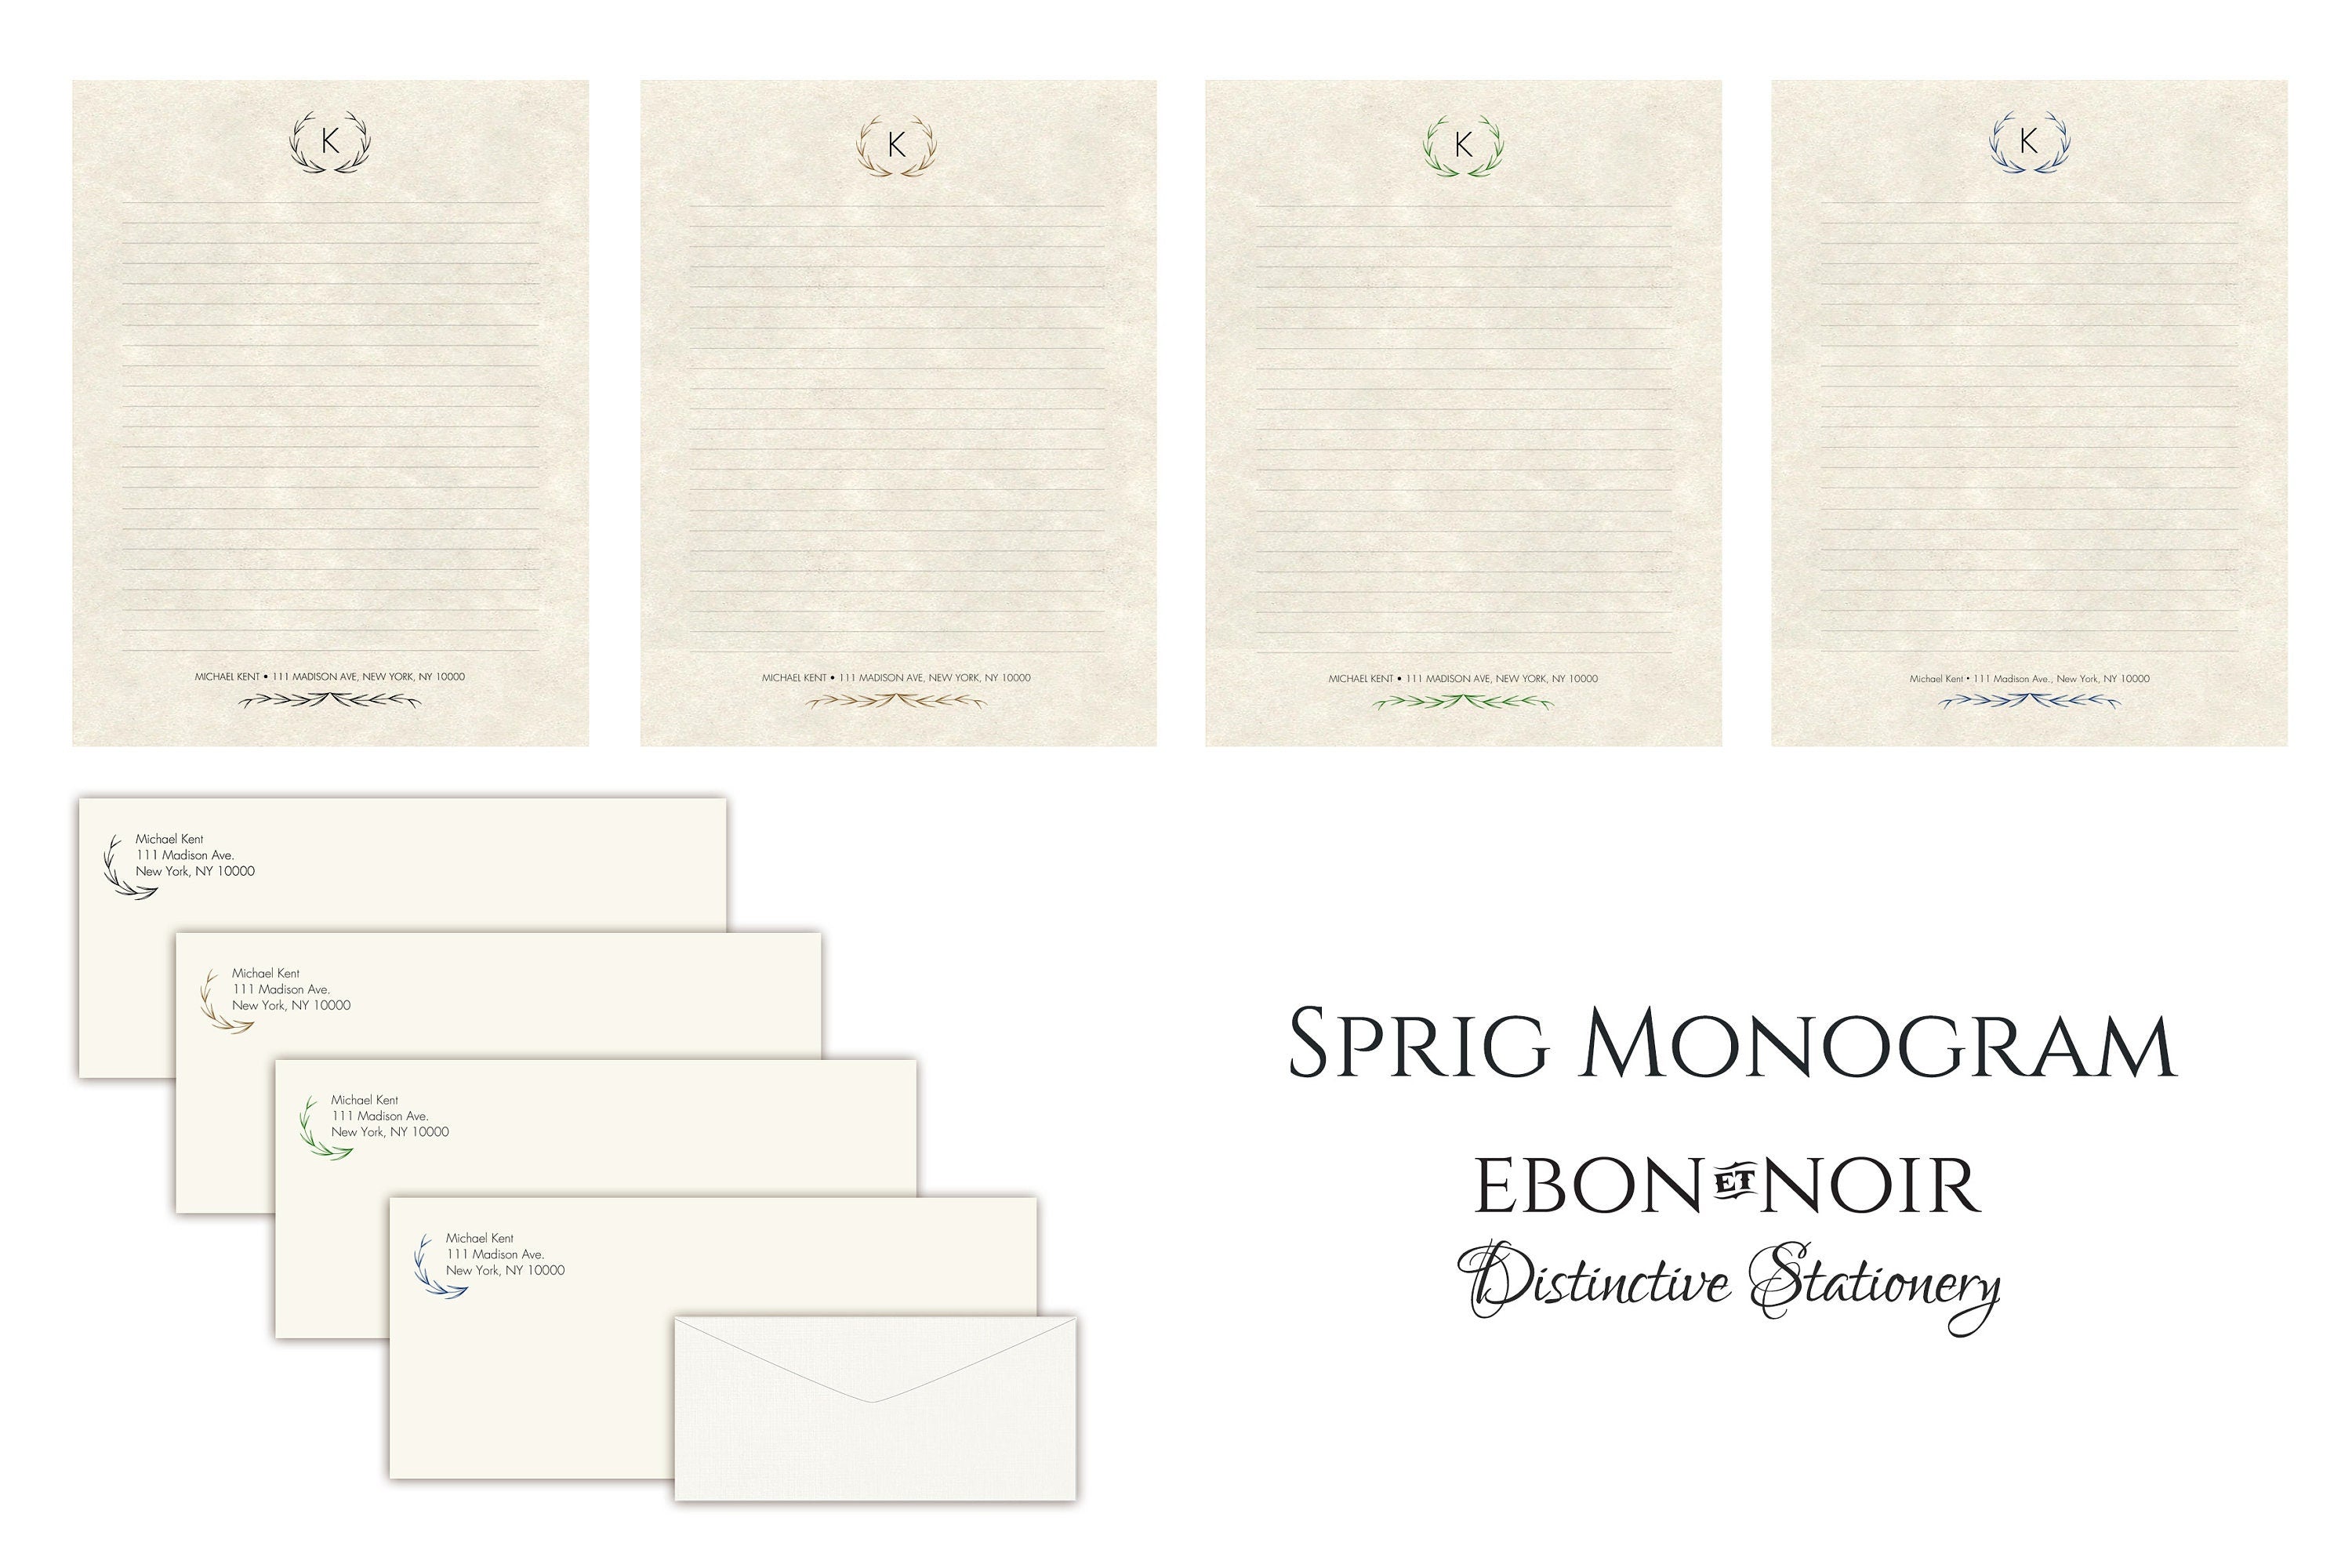 Sprig Monogram, Luxurious Handcrafted Stationery Set for Letter Writing, Personalized, 12 Sheets/10 Envelopes, Available in 4 Colors